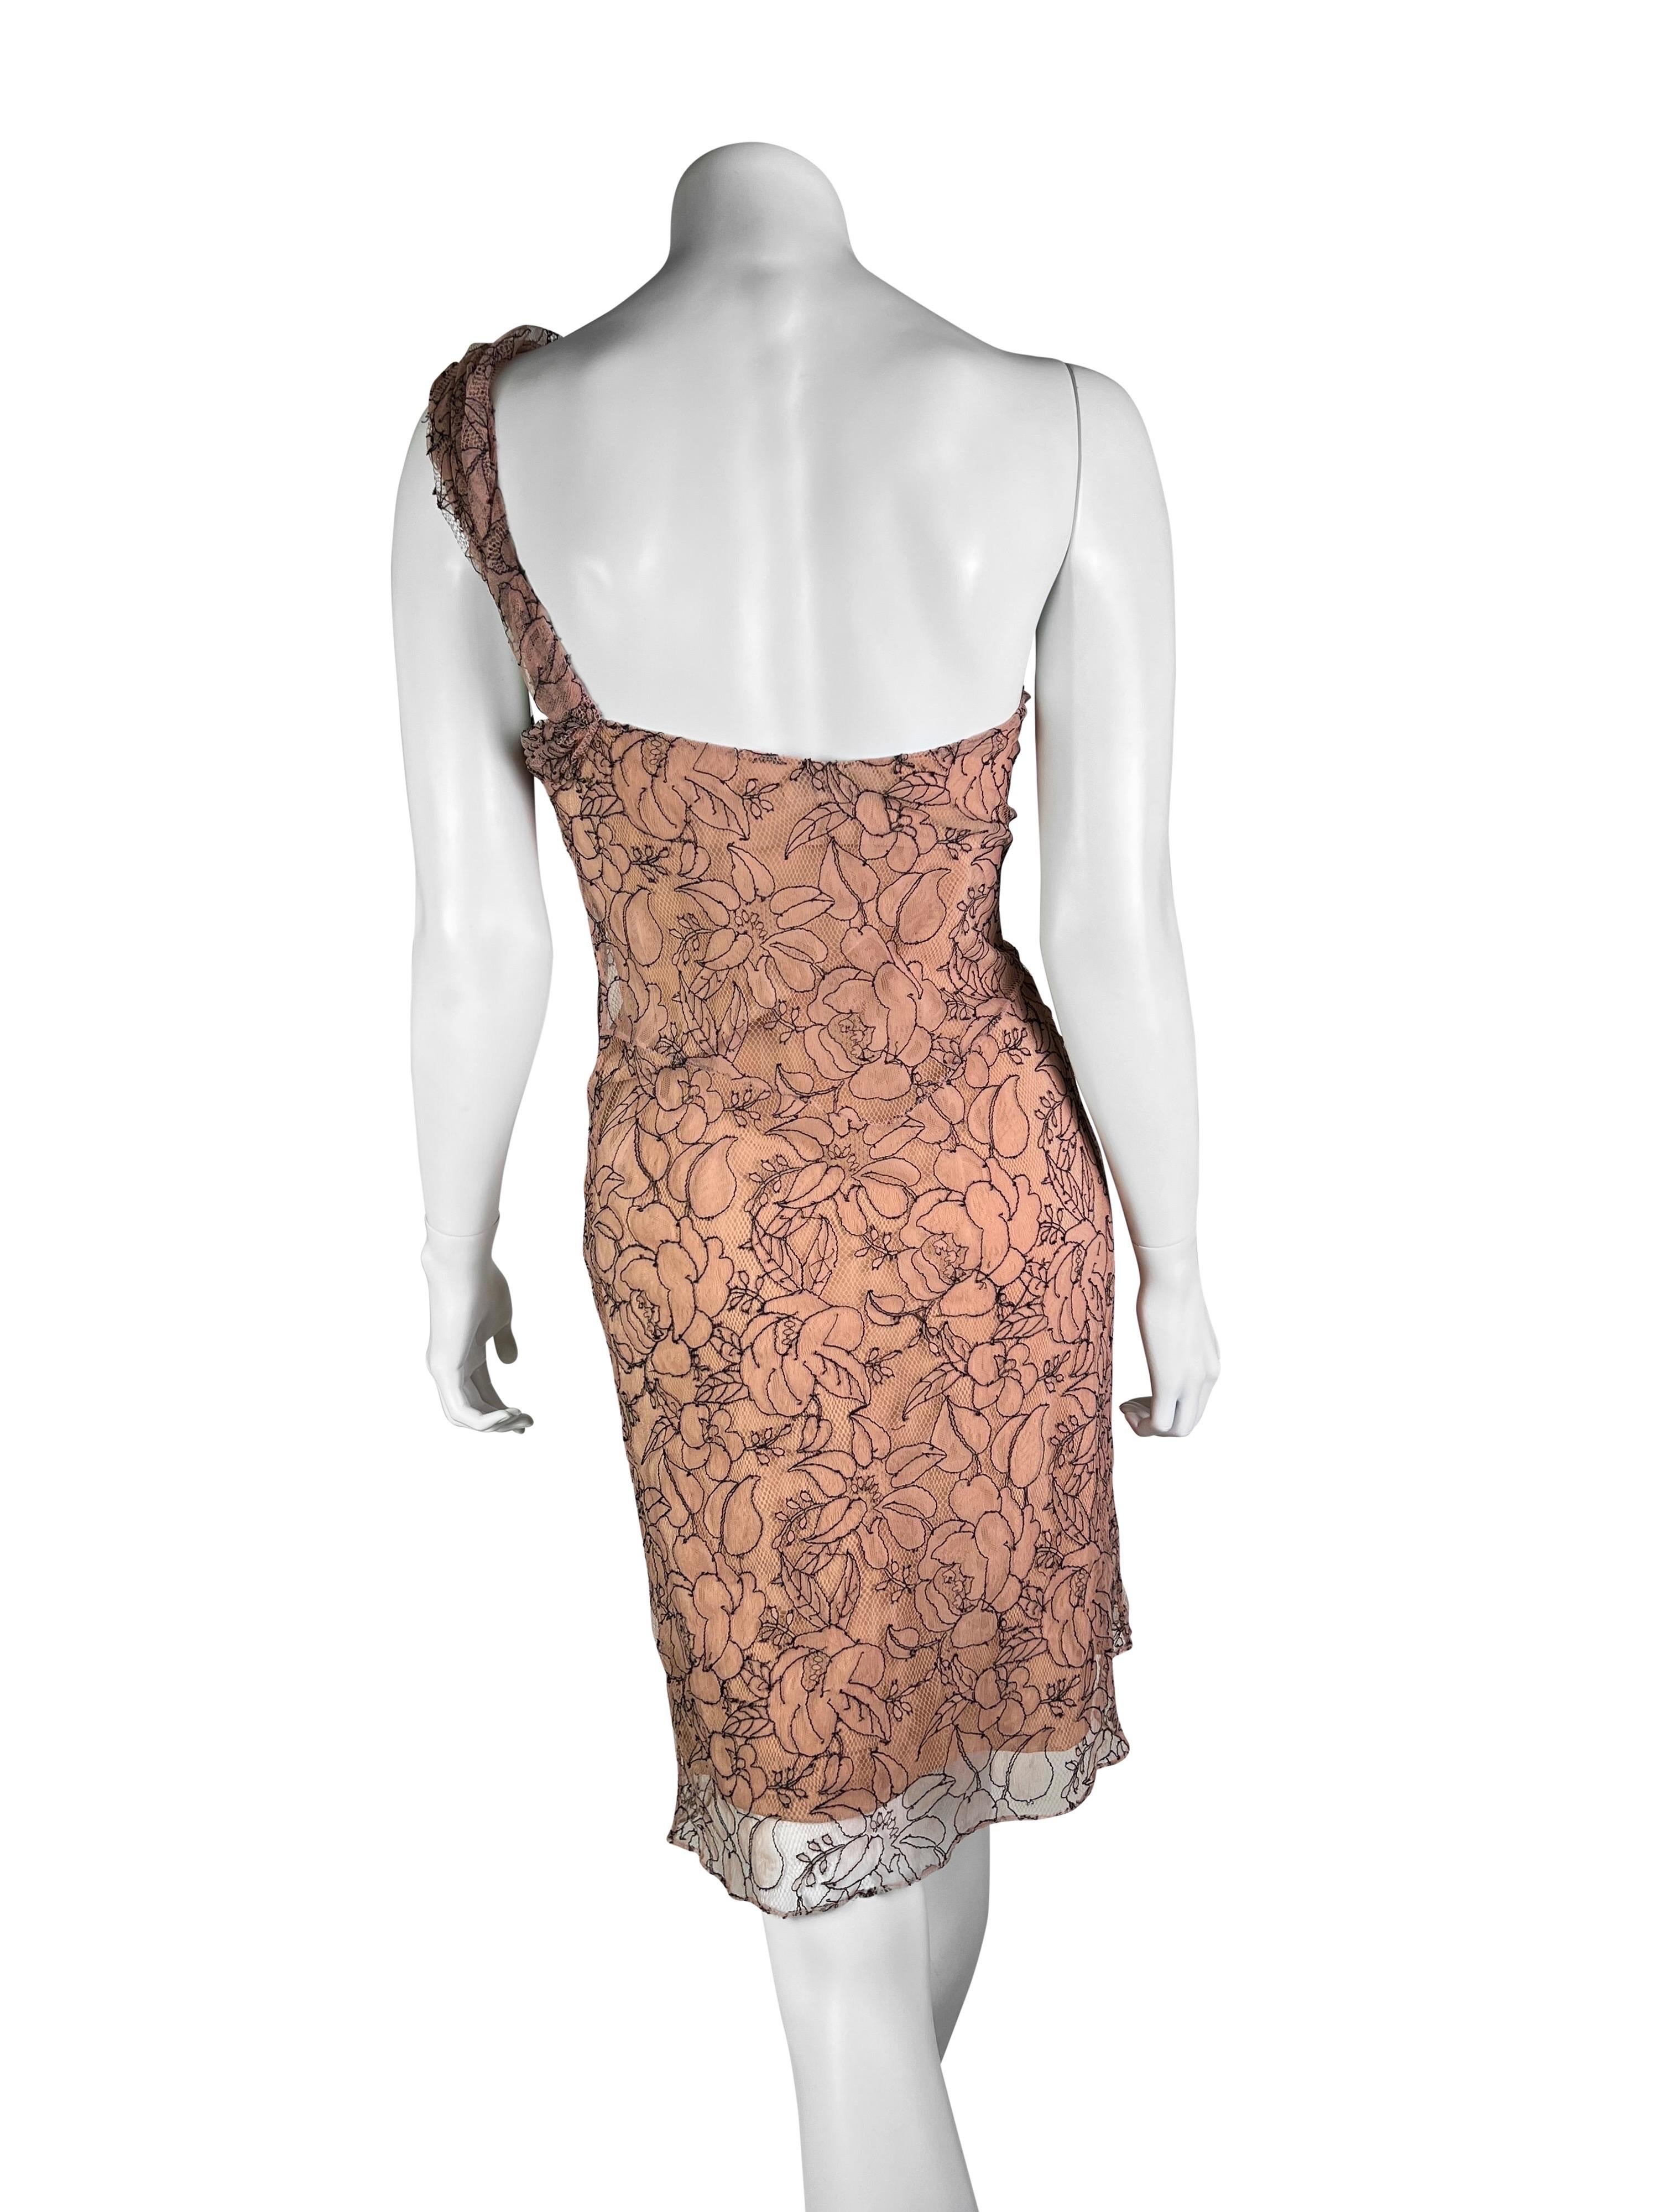 SS 2006 Dior by John Galliano Lace Mini Dress For Sale 3